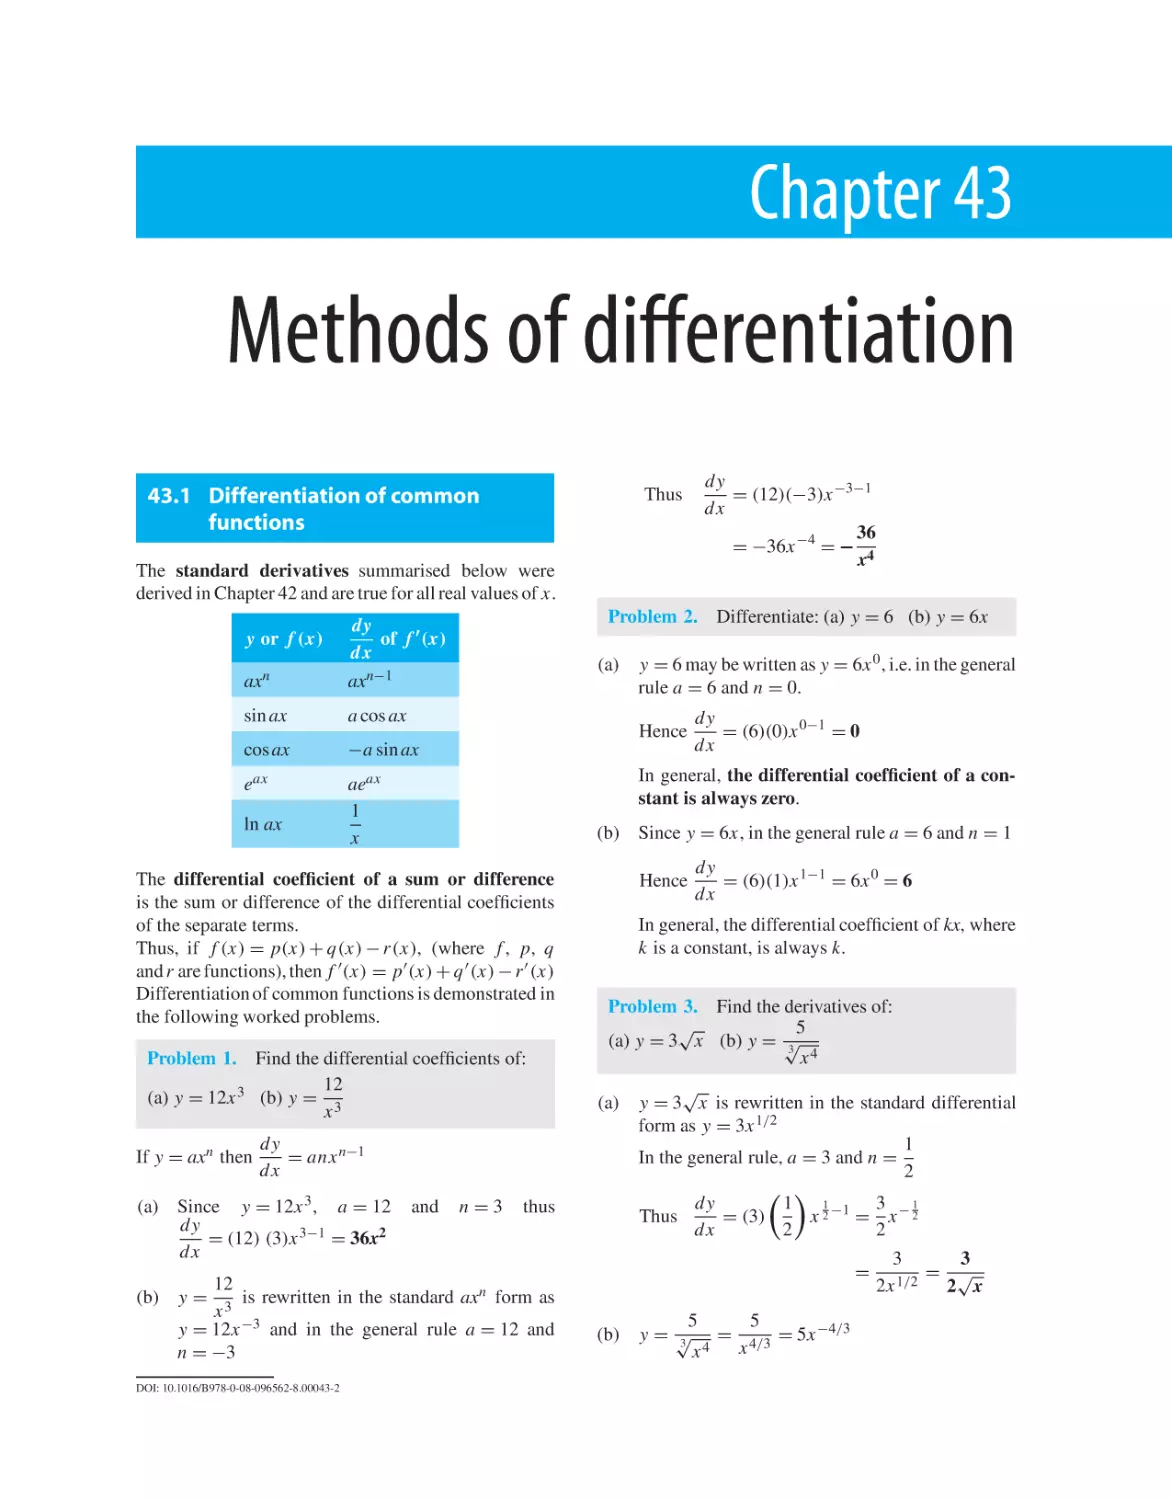 Chapter 43. Methods of differentiation
43.1 Differentiation of common functions